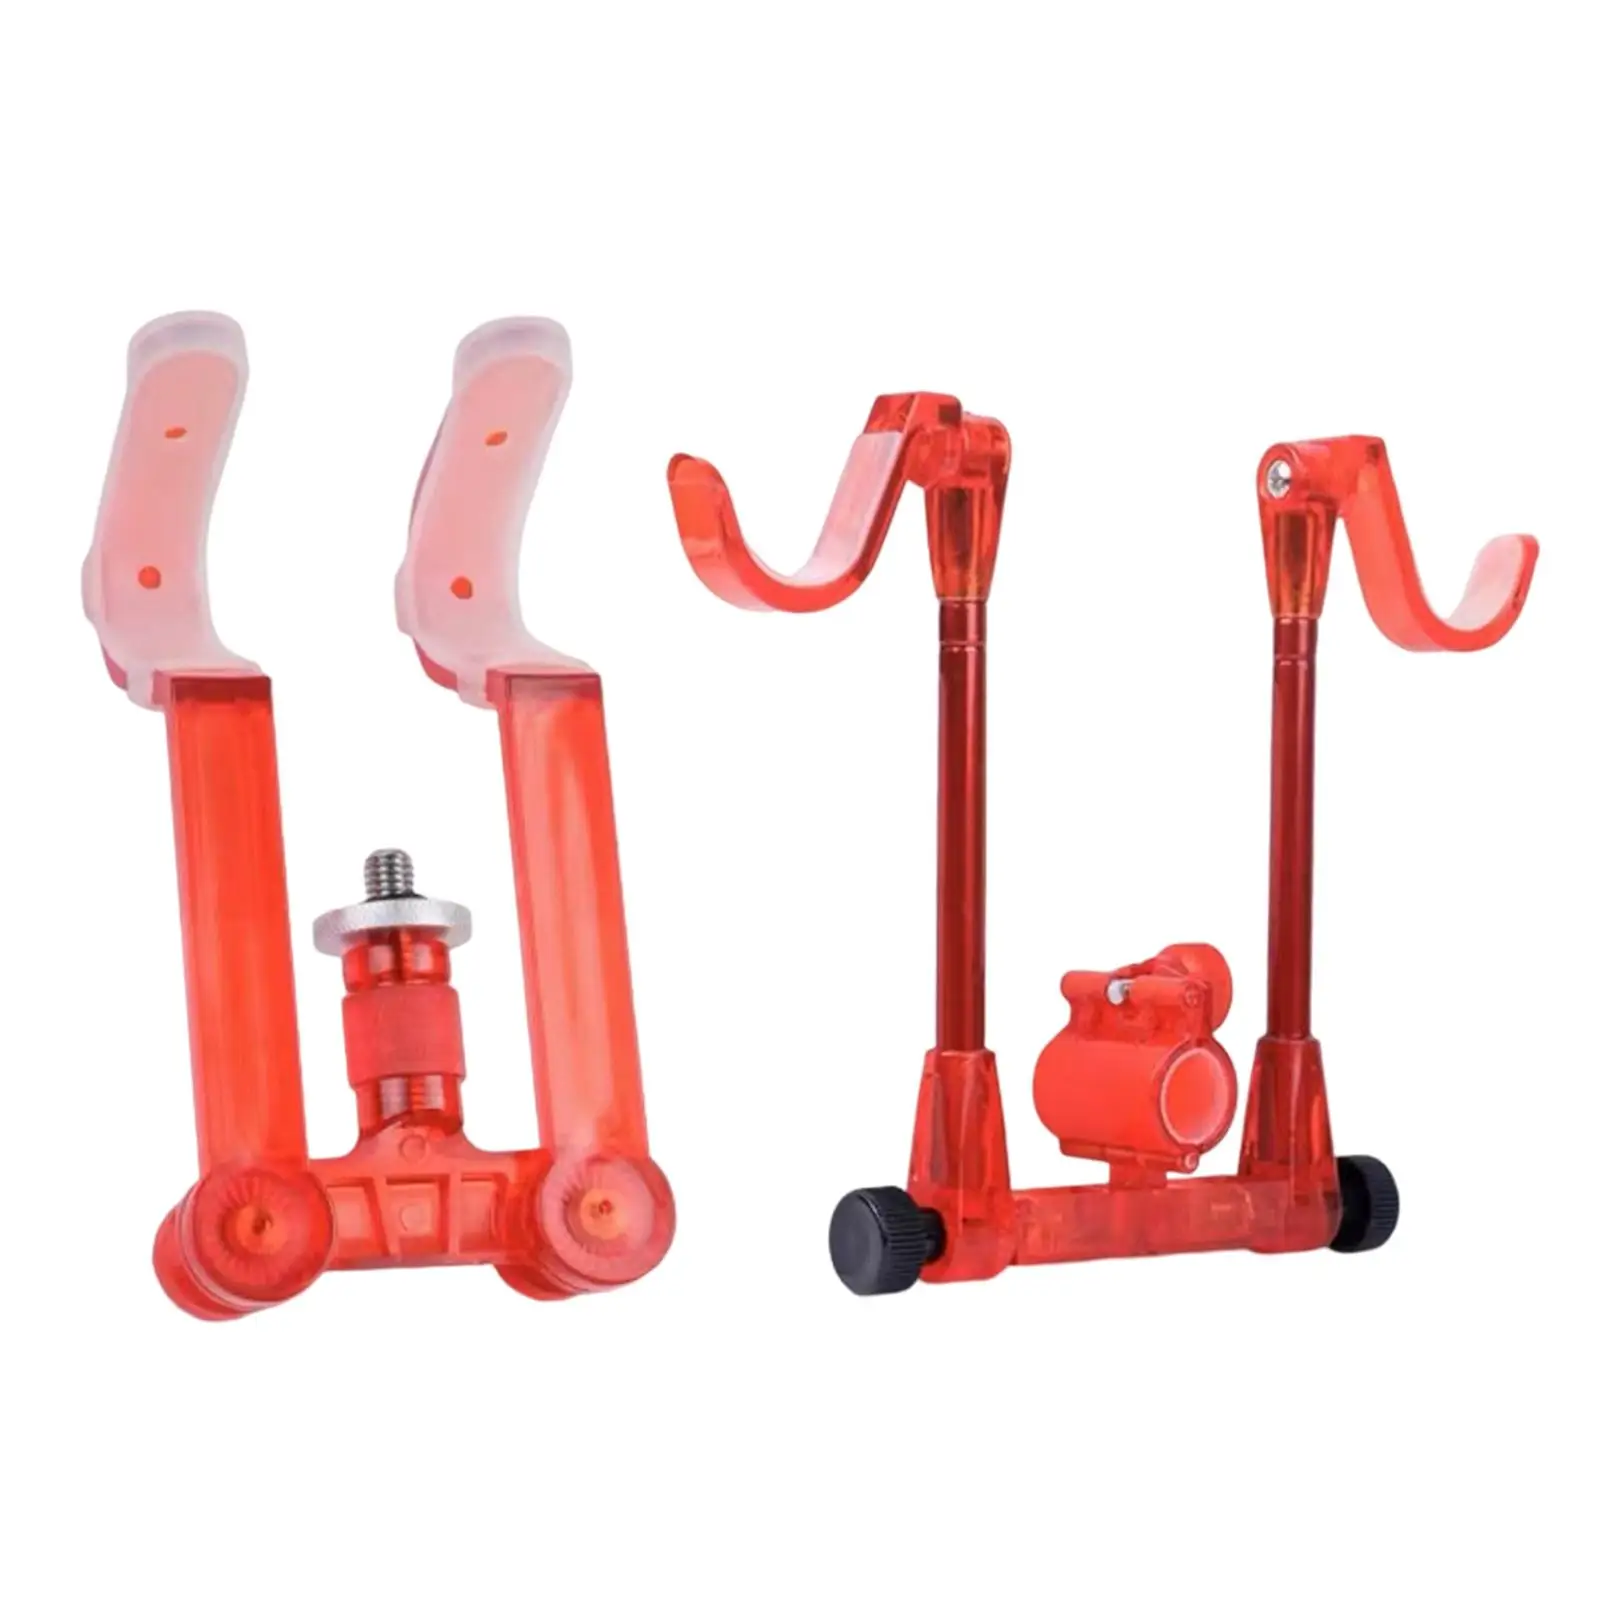 Fishing Rods Holder Rest Support Stand Tool Accessory Equipment Stand Fishing Rod Rack Stand for Fishing Outdoor Beach Men Pool